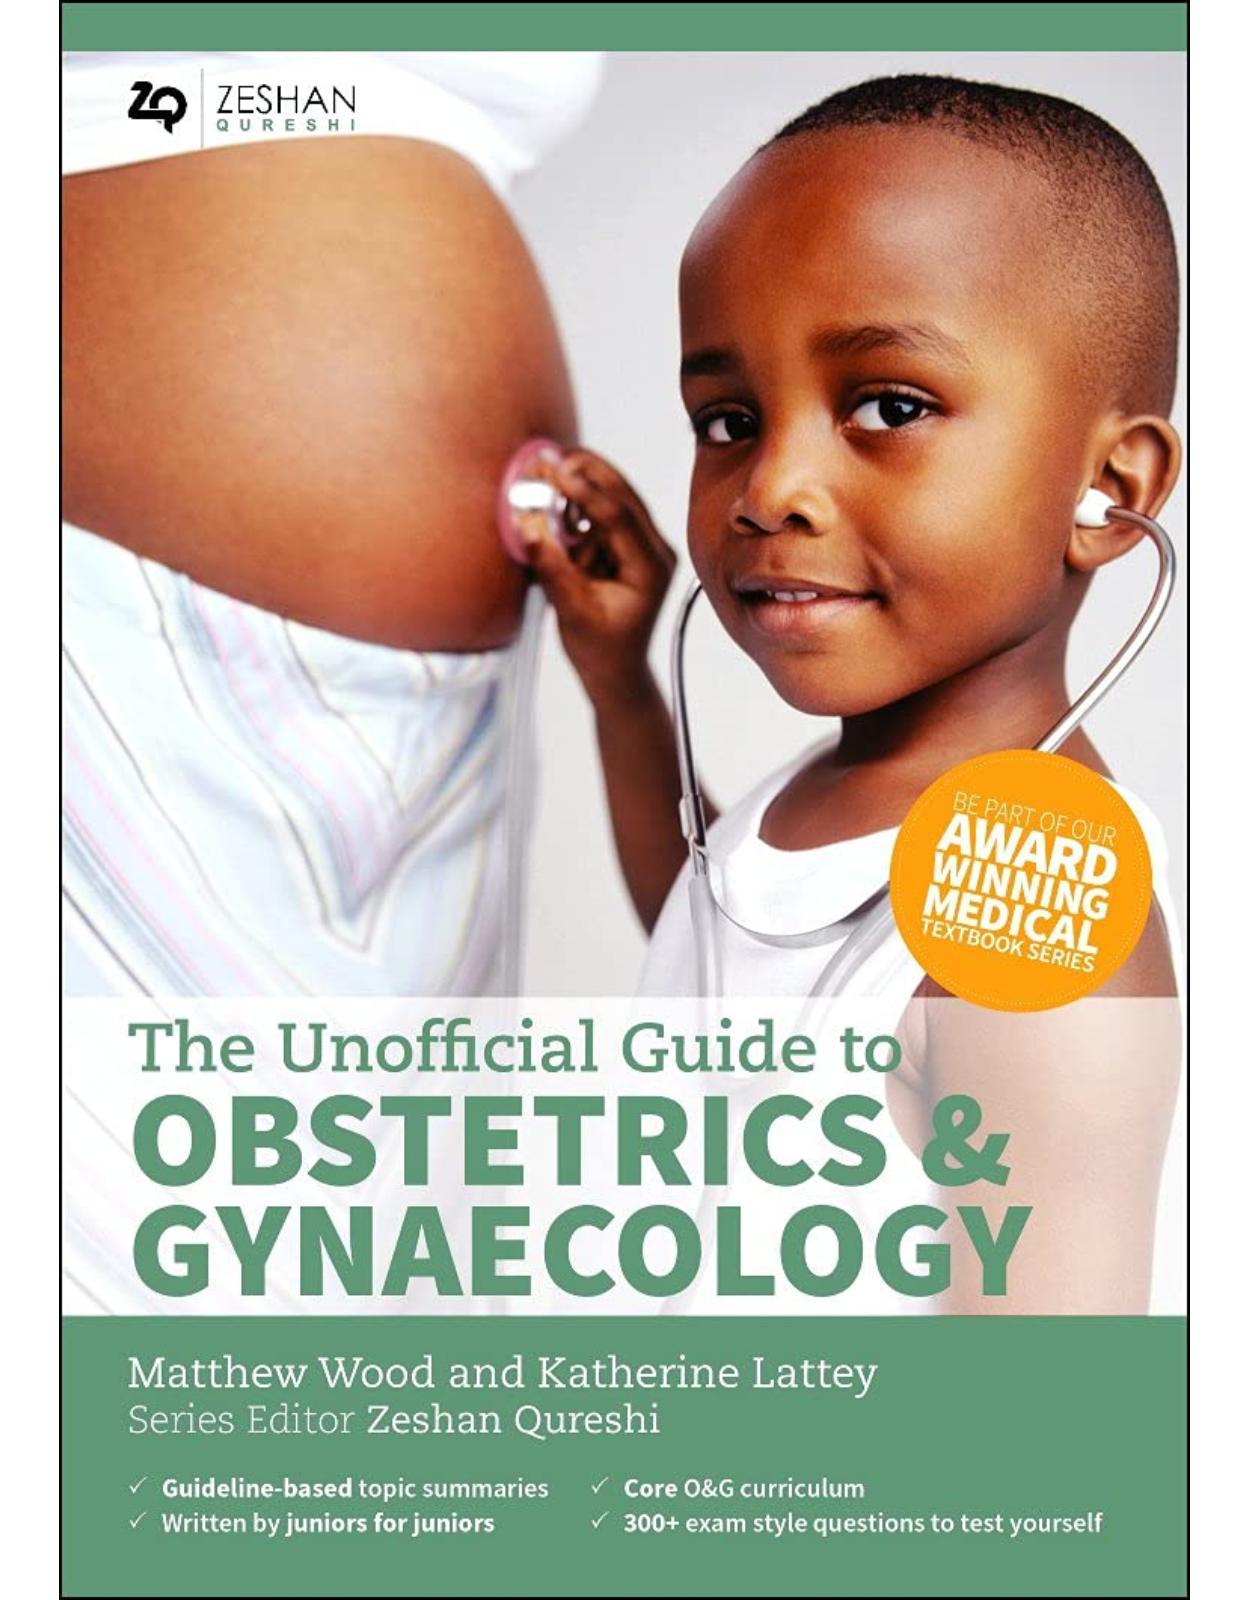 The Unofficial Guide to Obstetrics and Gynaecology: Core O&G Curriculum Covered: 300+ Multiple Choice Questions with Detailed Explanations and Key Subject Summaries